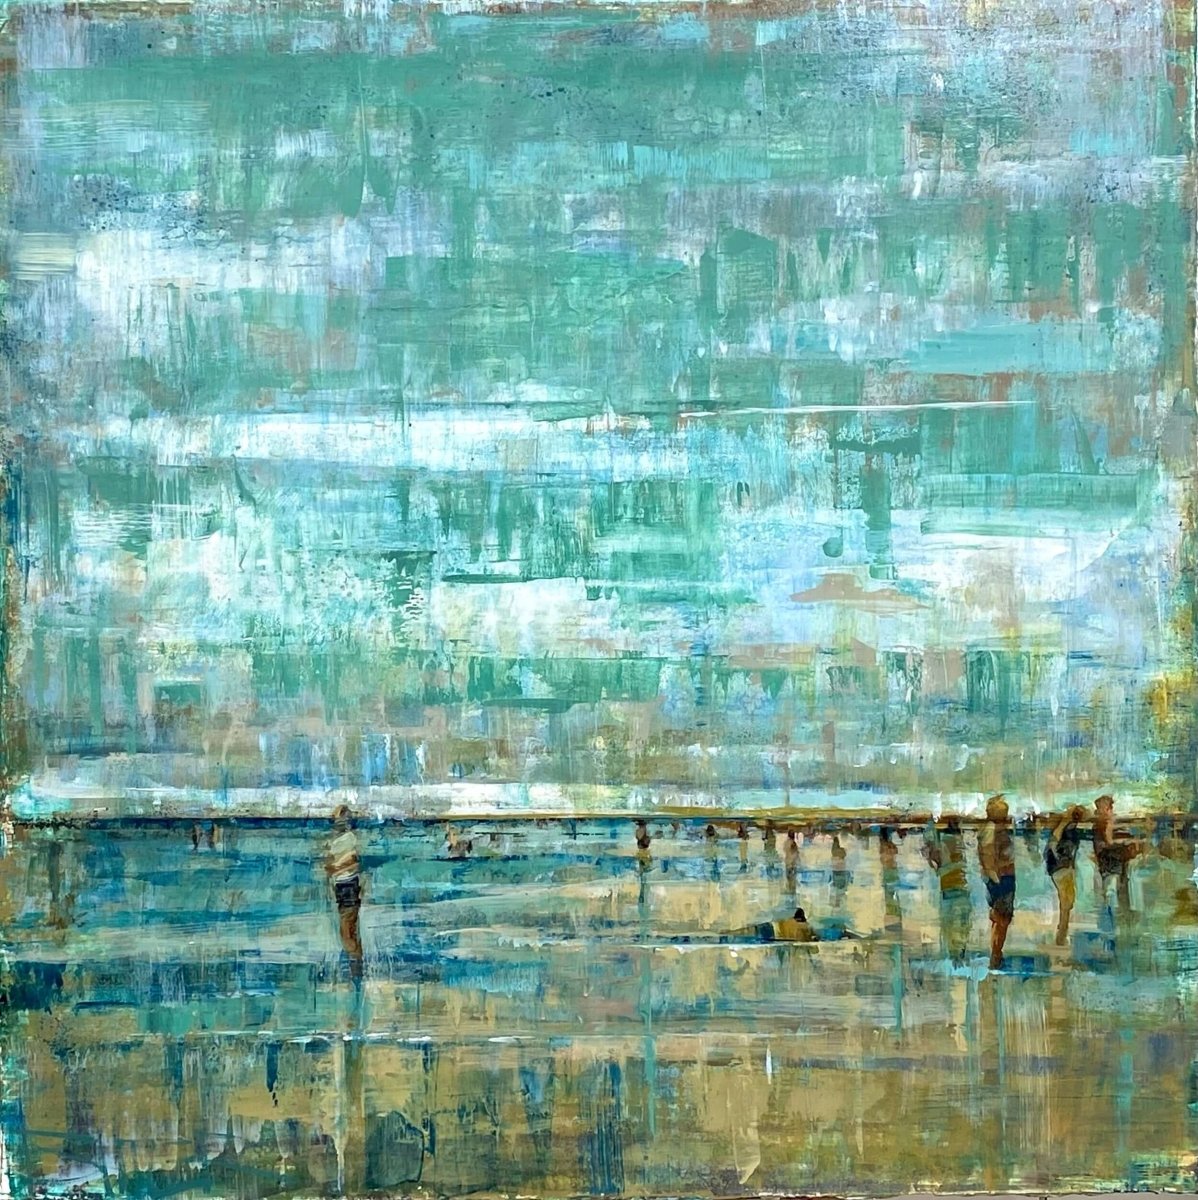 Still Shore by Curt Butler at LePrince Galleries